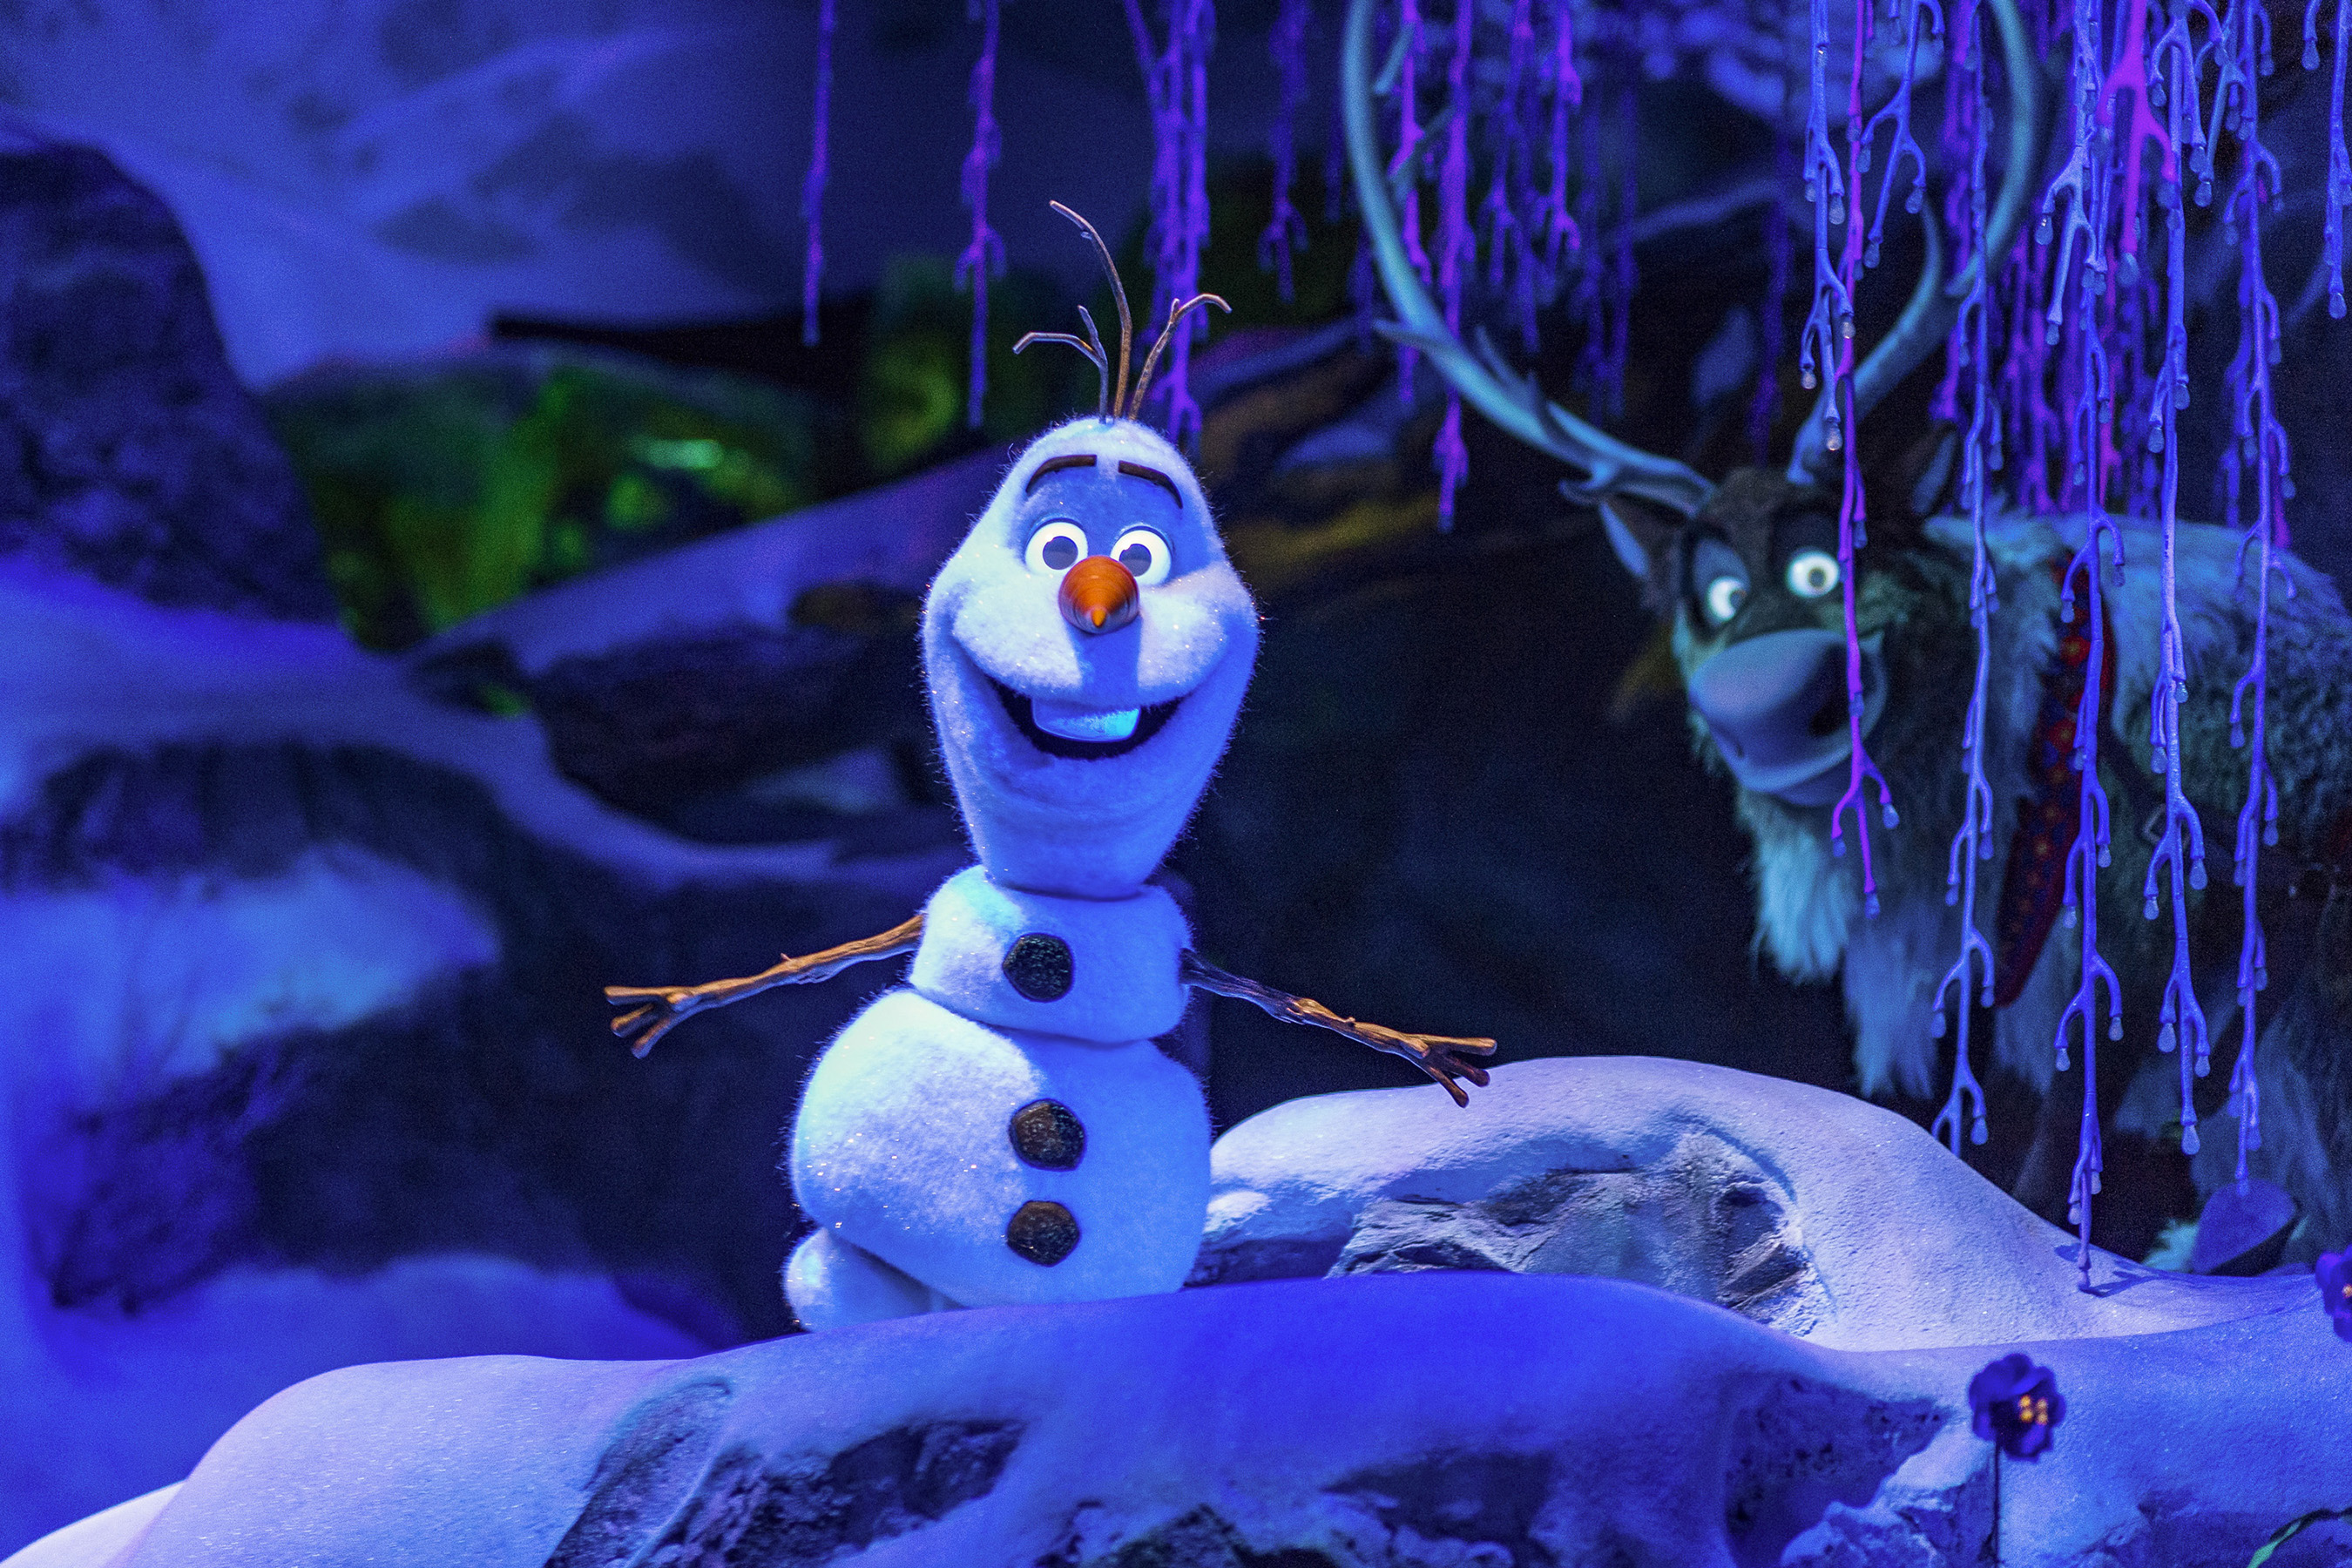 Find out more about 'Frozen Ever After' at Epcot's Norway Pavilion